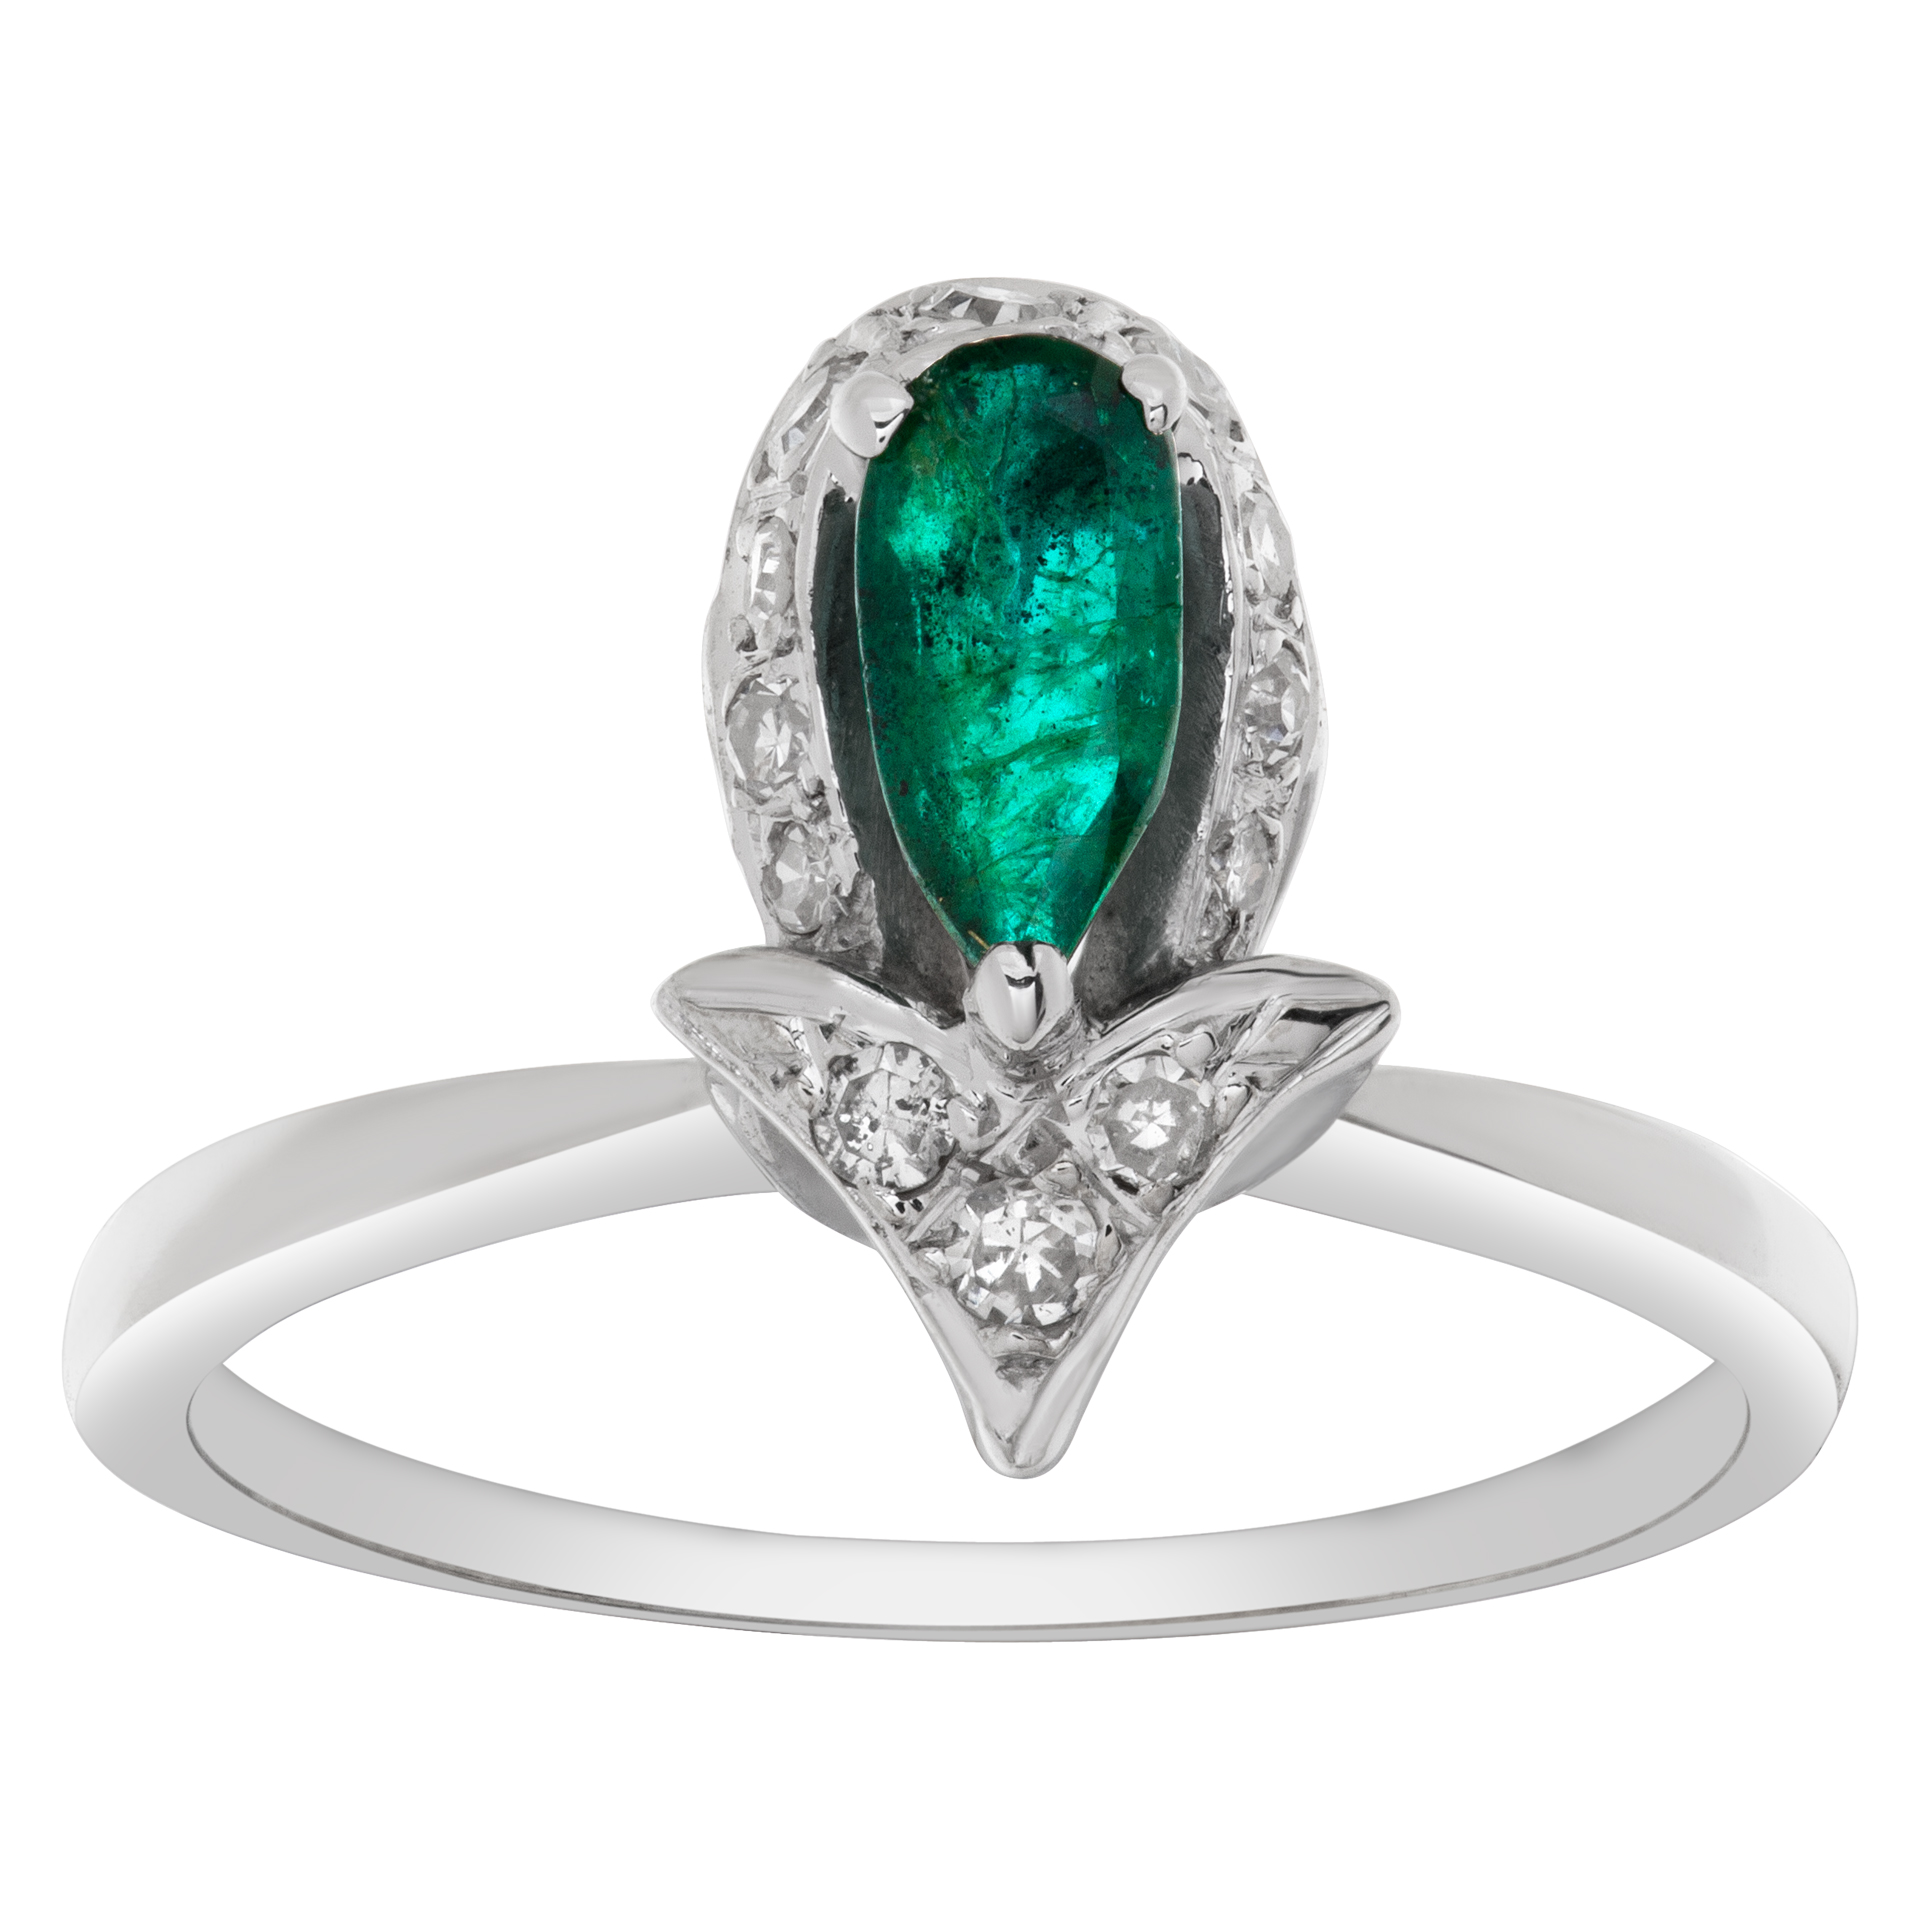 Tear drop Emerald ring with brilliant round cut accent diamonds set in 14k white gold image 1